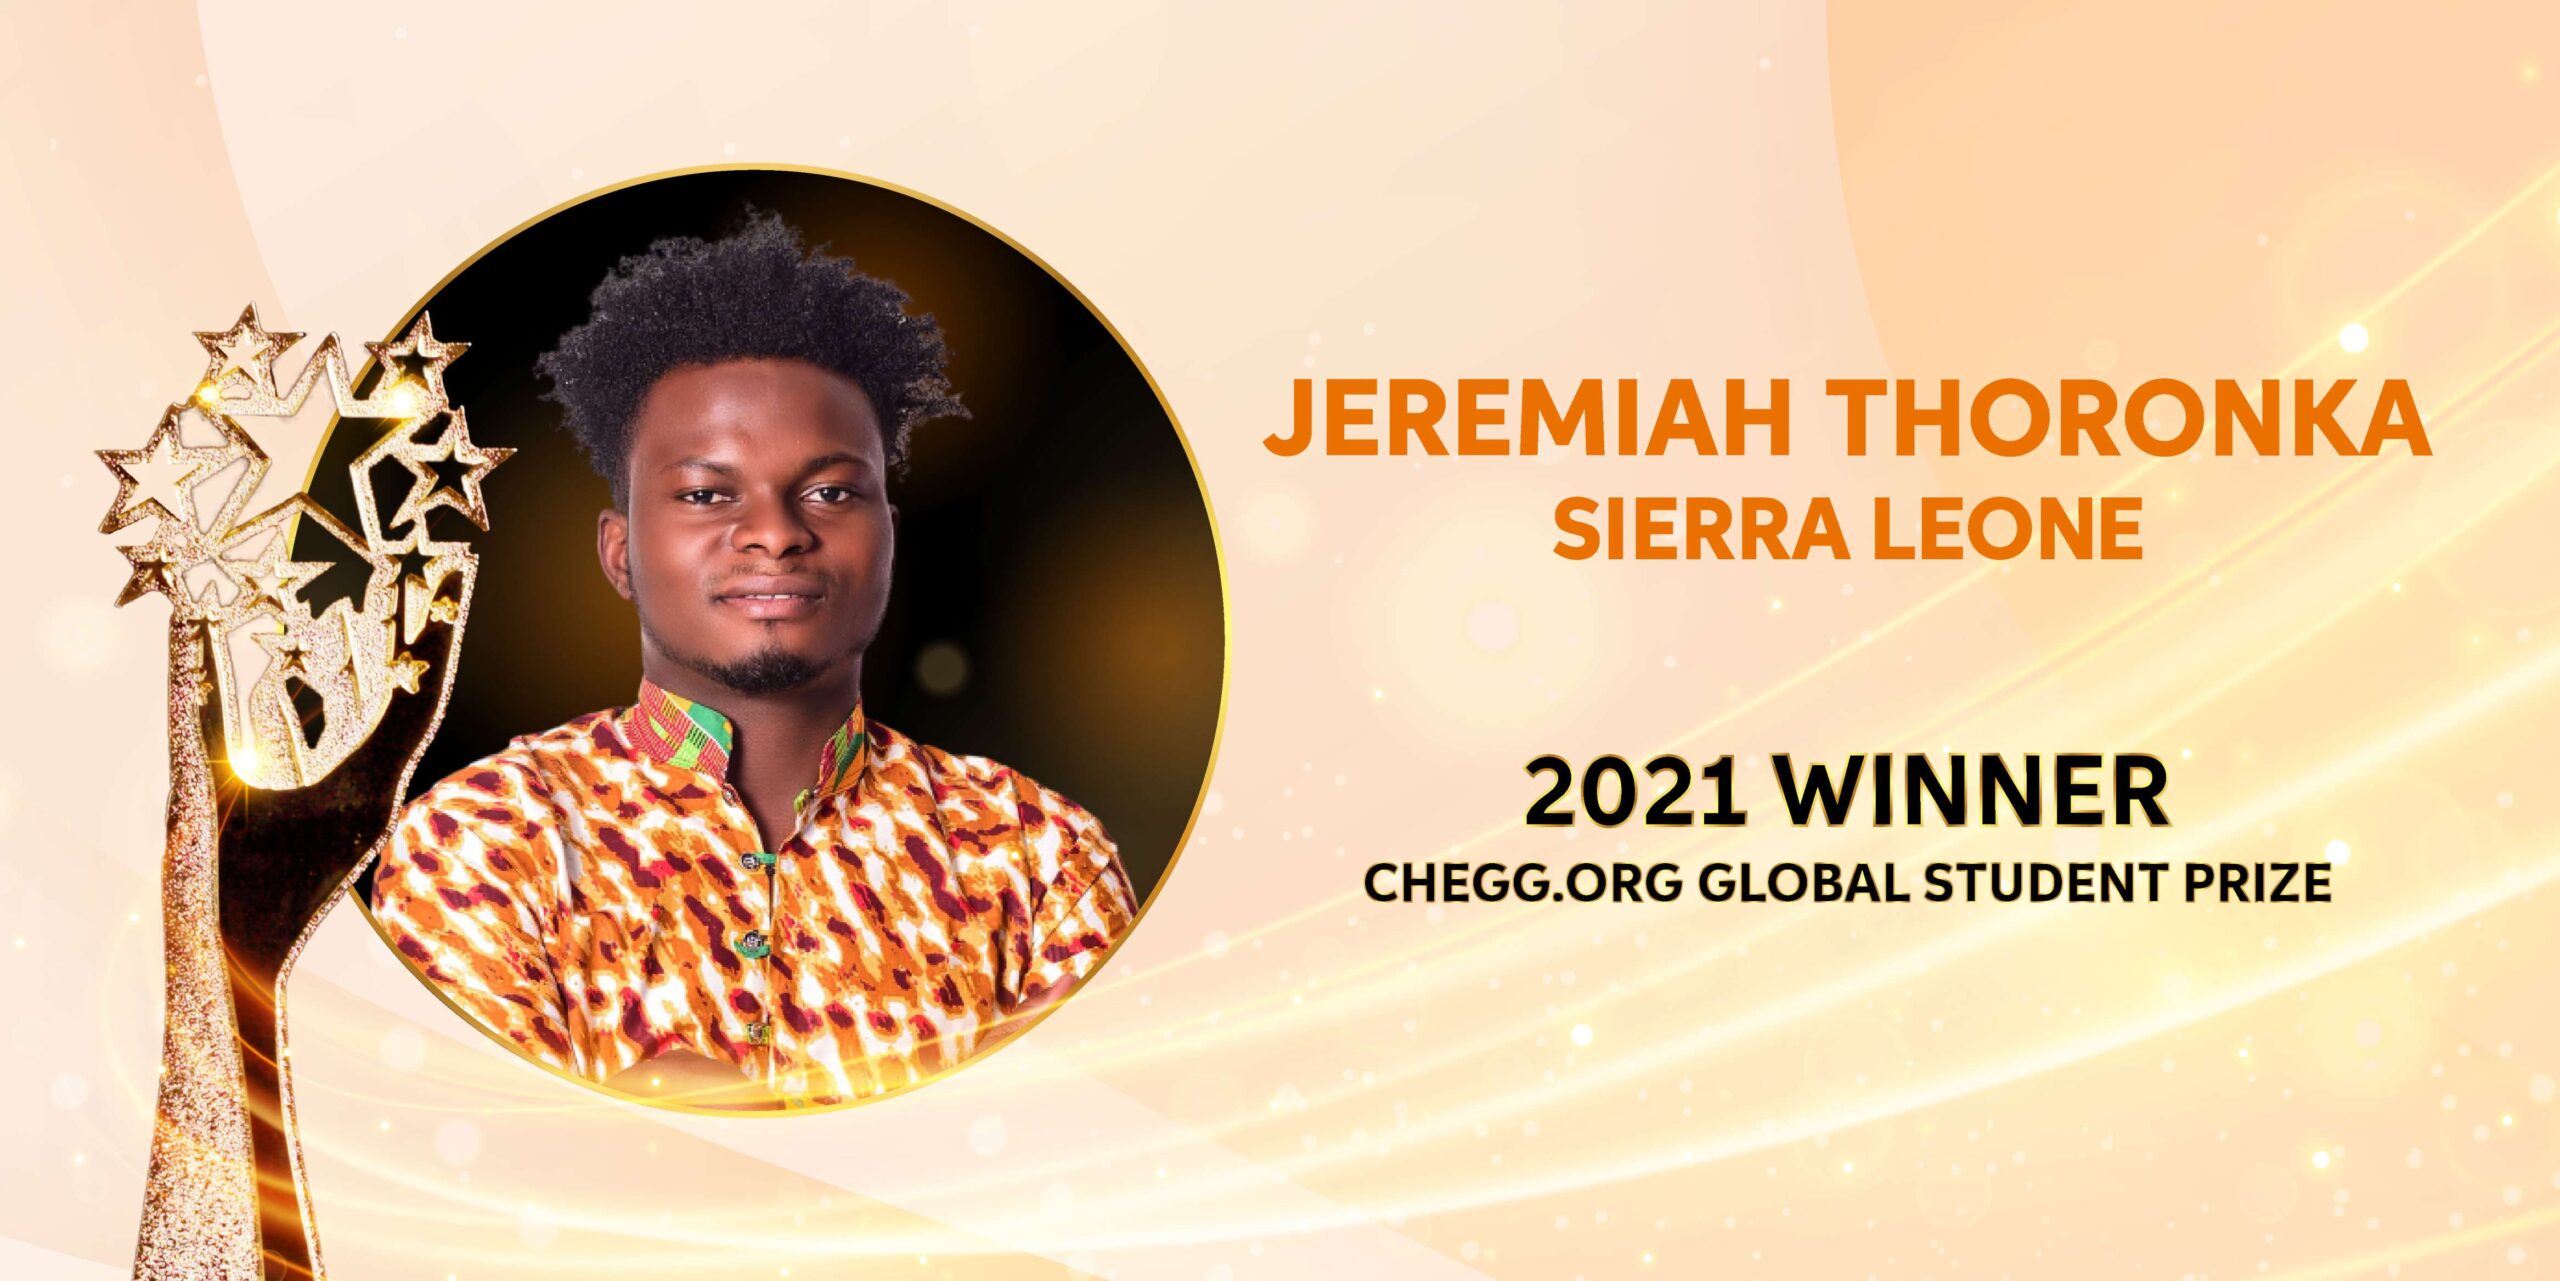 Sierra Leone student, Jeremiah Thoronka, wins $100,000 international prize for his clean energy device invention.